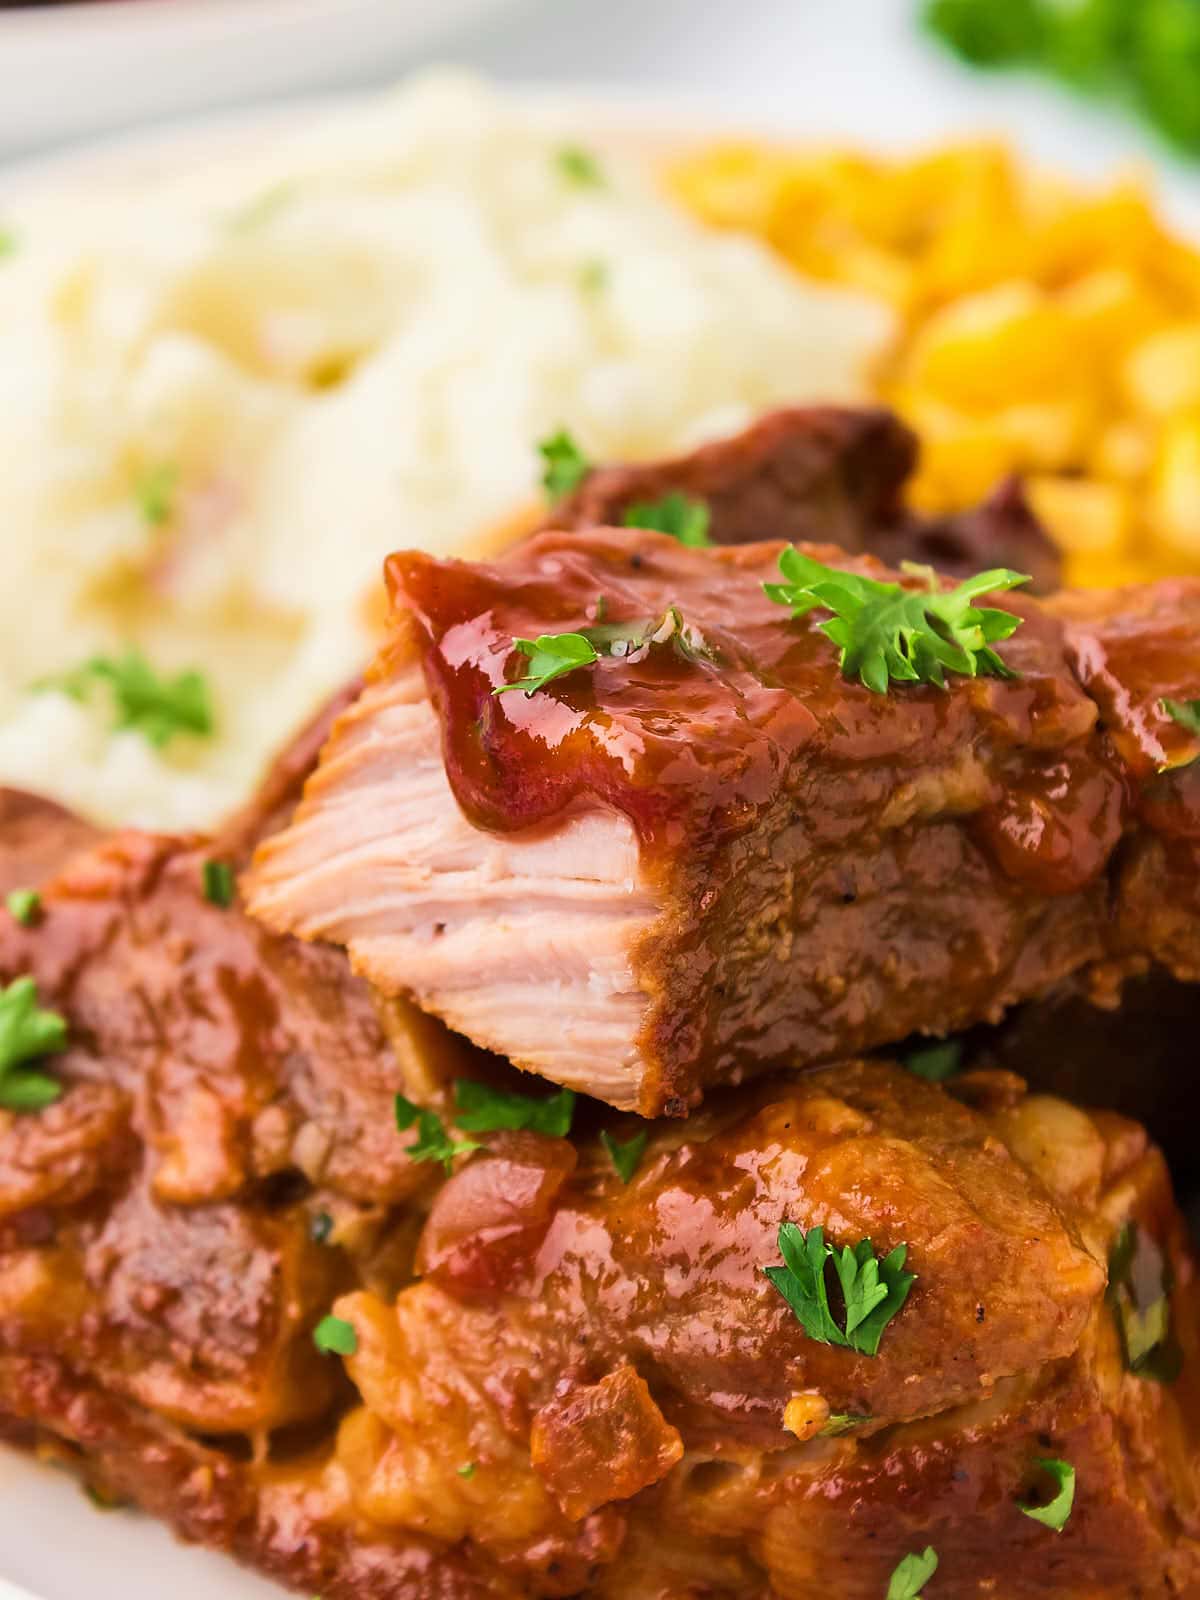 Slow Cooker Country Style Ribs recipe by Cheerful Cook.